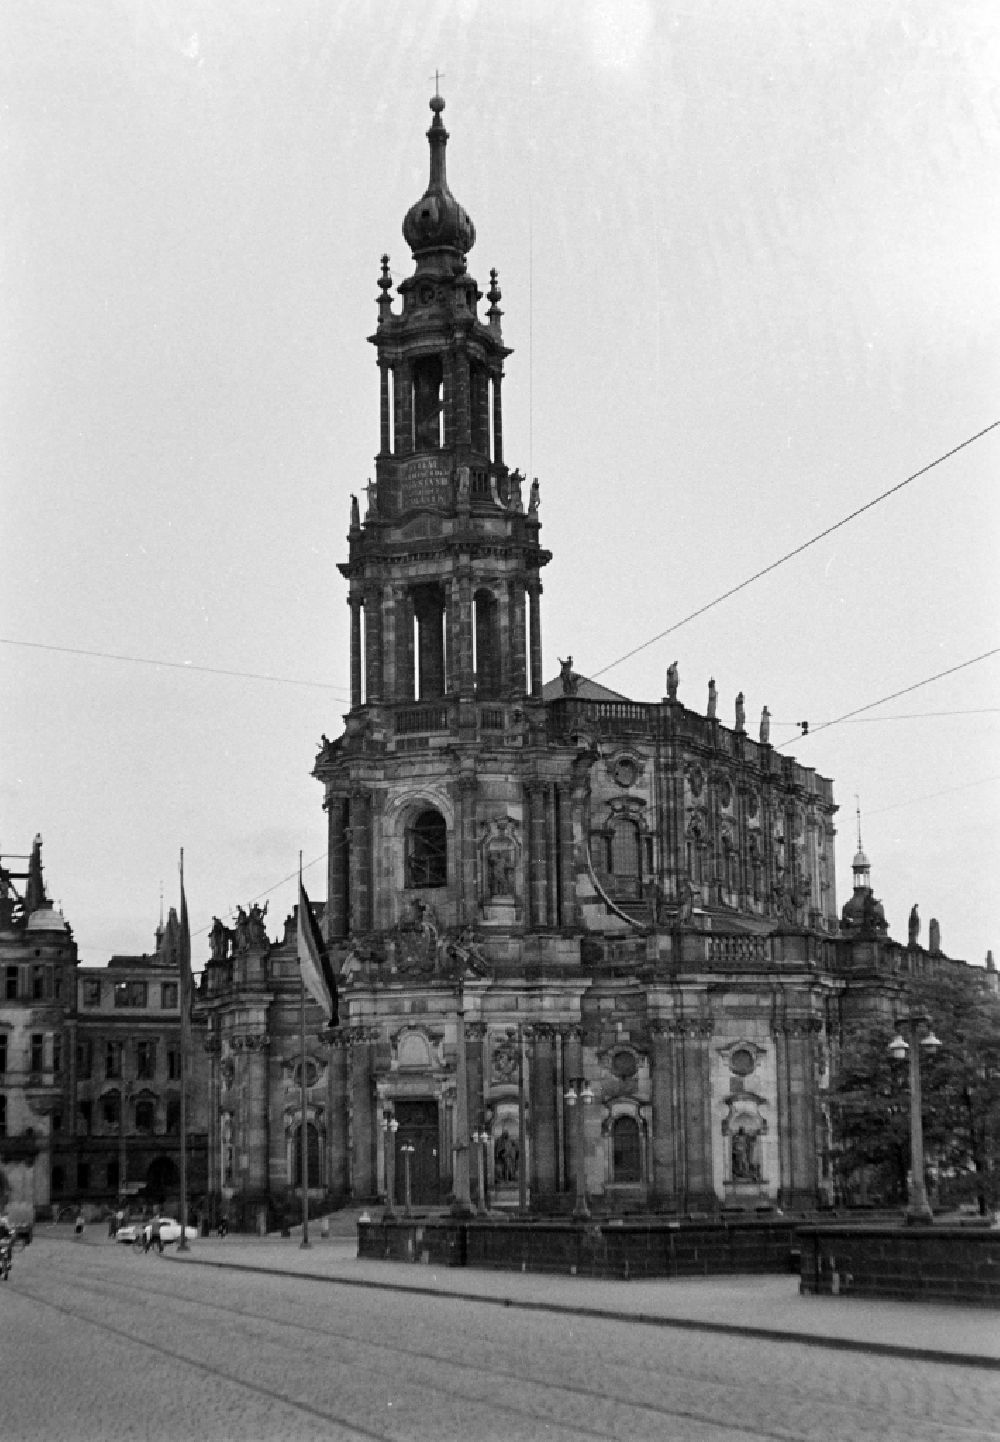 GDR picture archive: Dresden - Facade and roof structure of the sacral building of the church Kathedrale Sanctissimae Trinitatis on street Schlossstrasse in the district Altstadt in Dresden, Saxony on the territory of the former GDR, German Democratic Republic